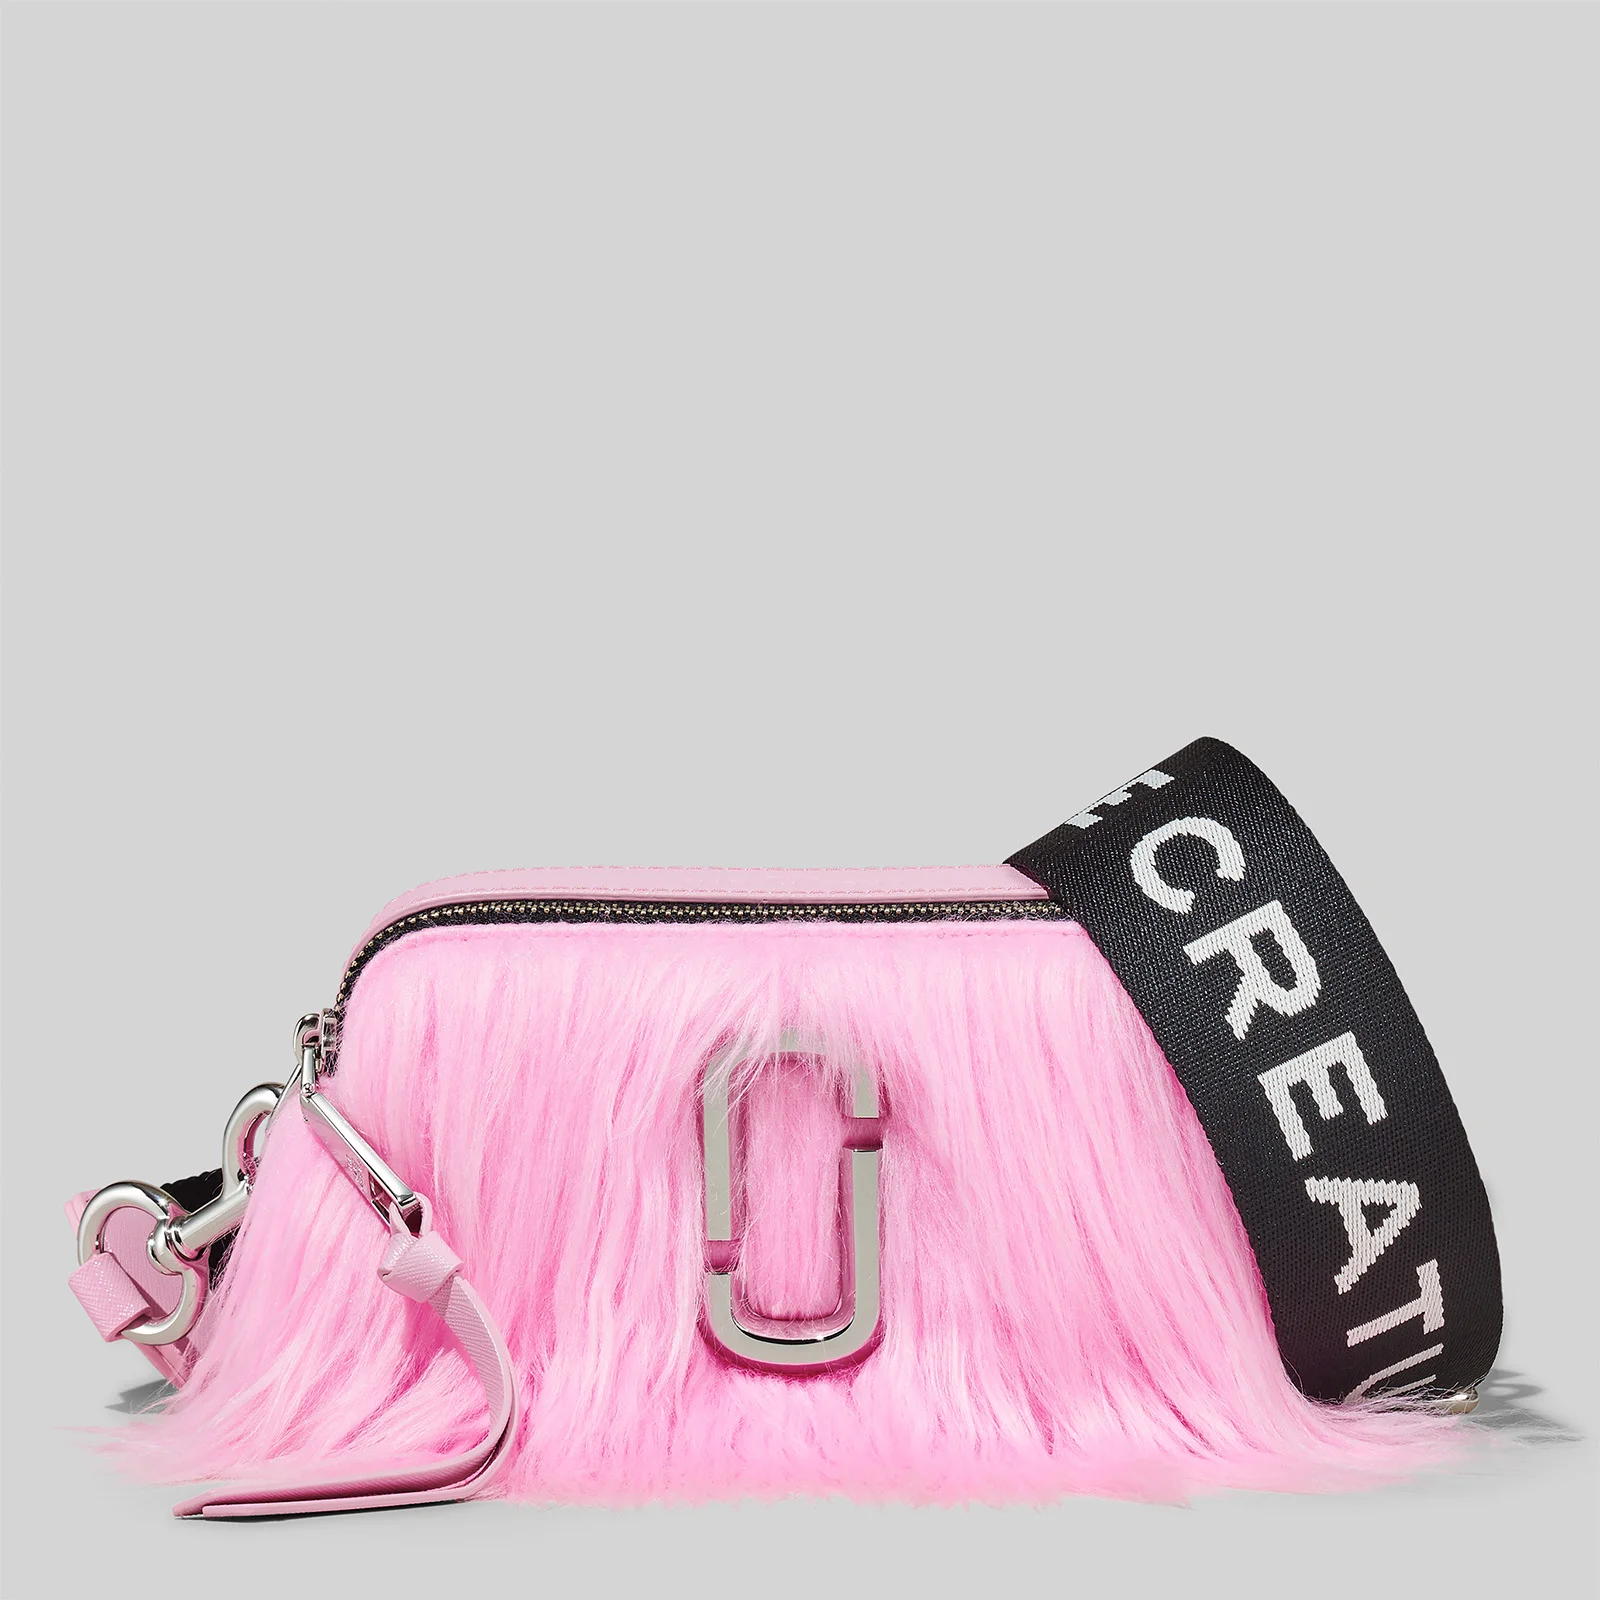 Marc Jacobs Women's The Creature Snapshot - Confection Pink Image 1